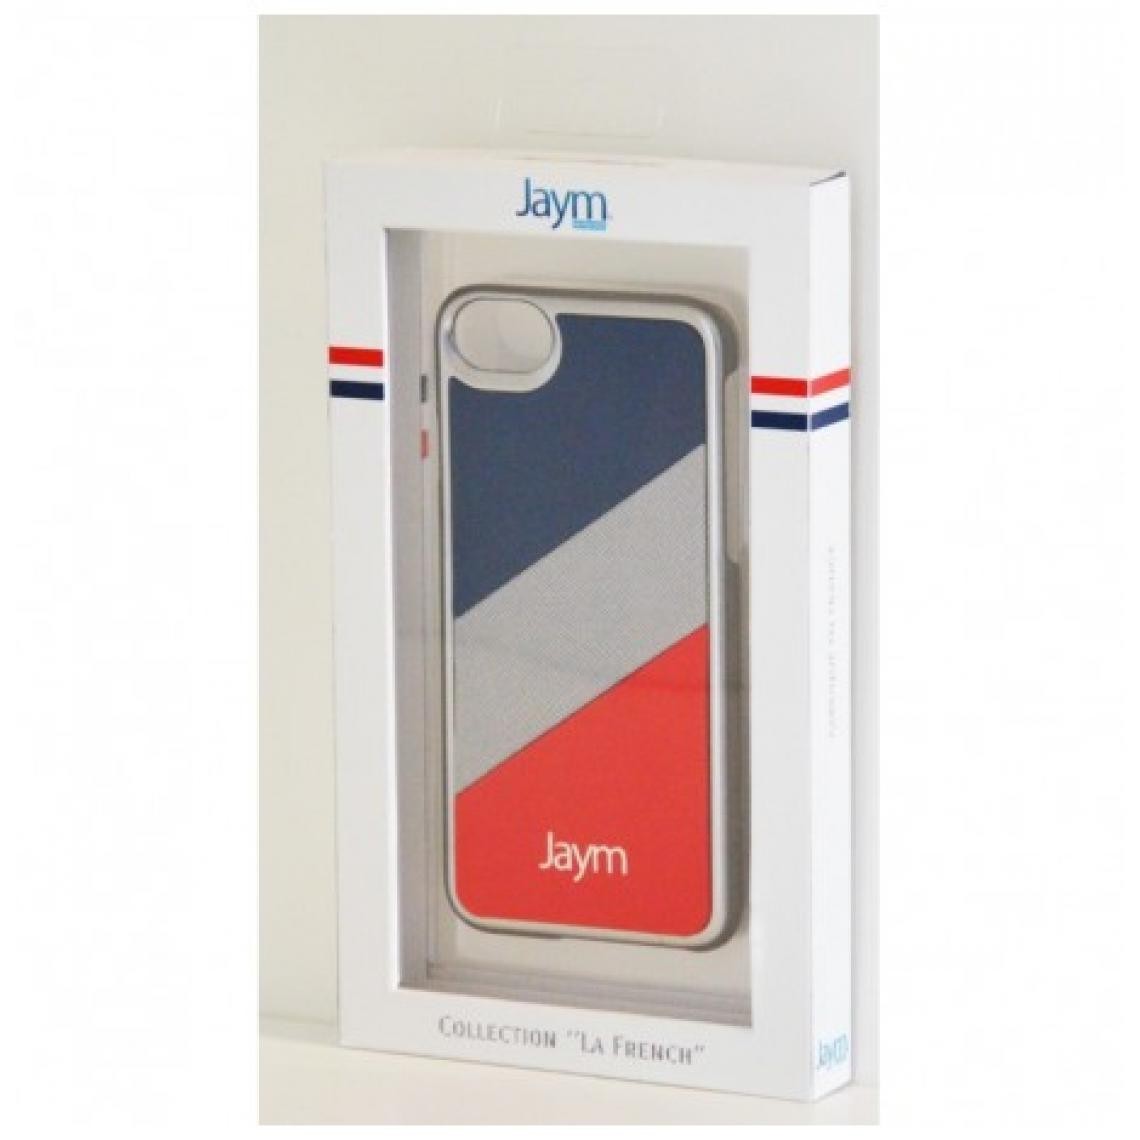 Jaym - HOUSSE COQUE ETUI JAYM MADE IN FRANCE IPHONE 6 6S 7 8 BLEU SILVER ROUGE - Coque, étui smartphone